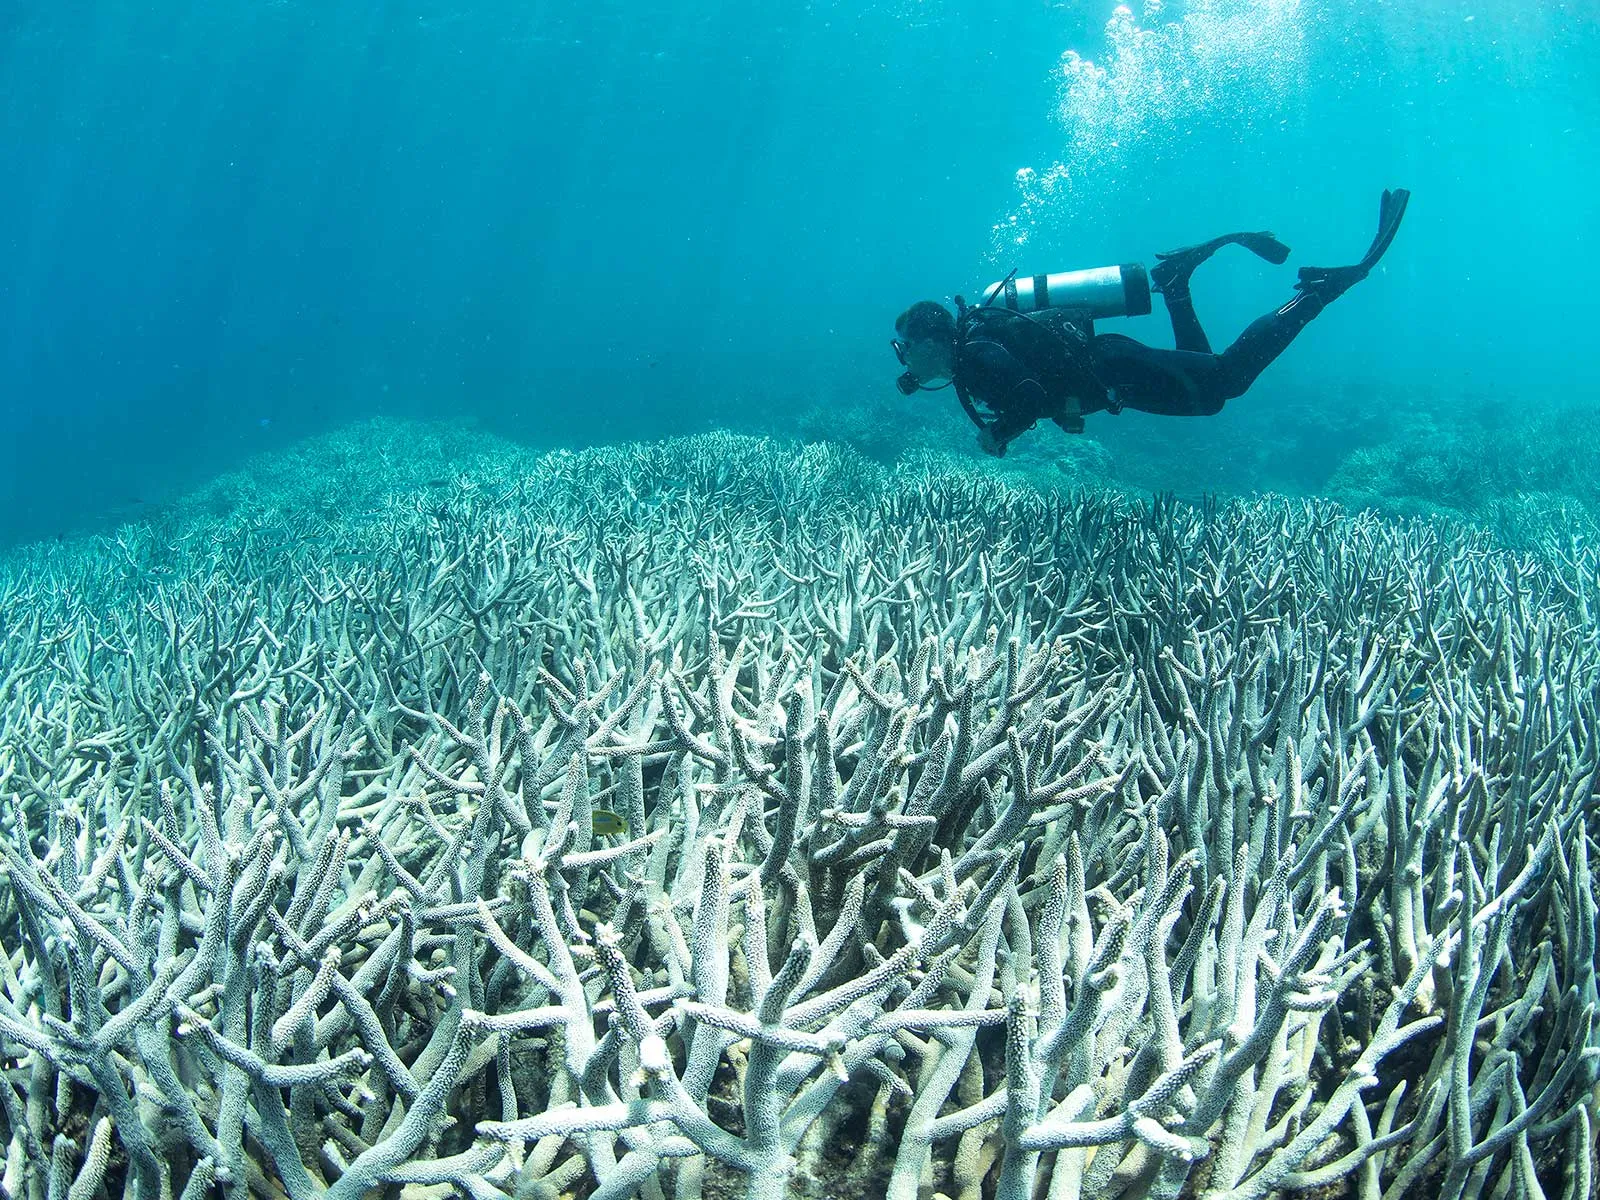 How have humans impacted the ocean's coral reefs?